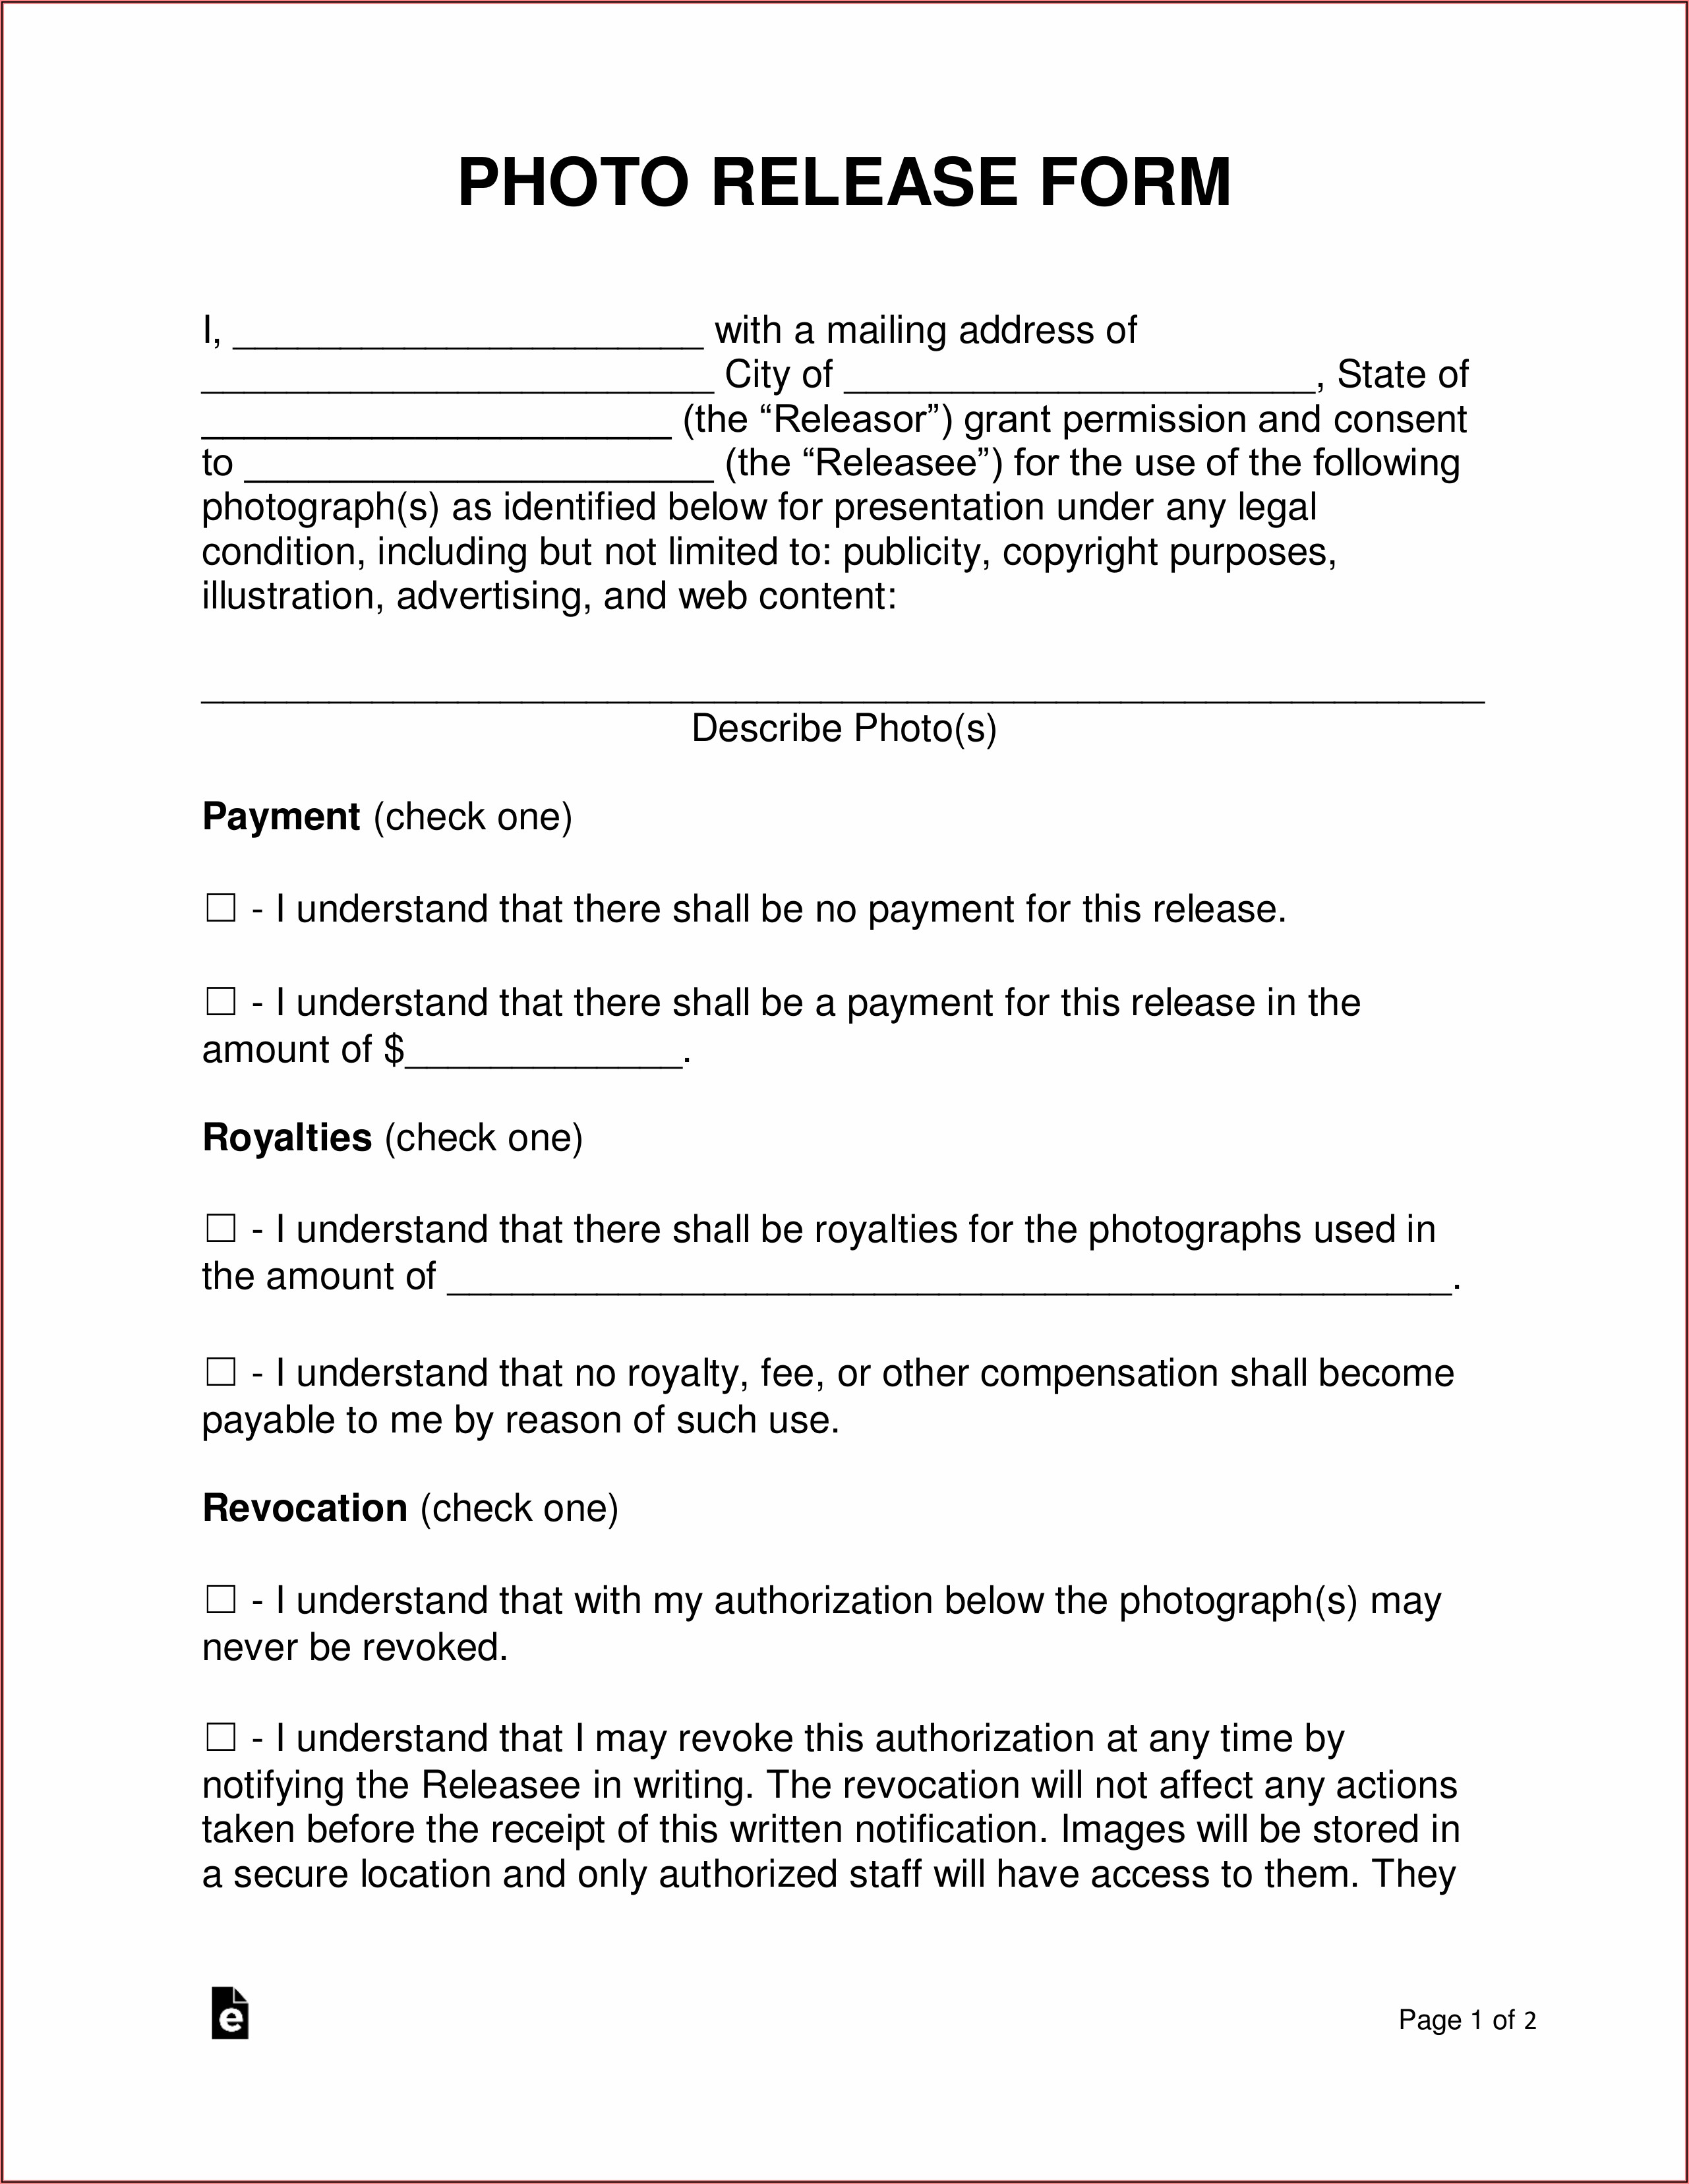 Generic Photography Release Form